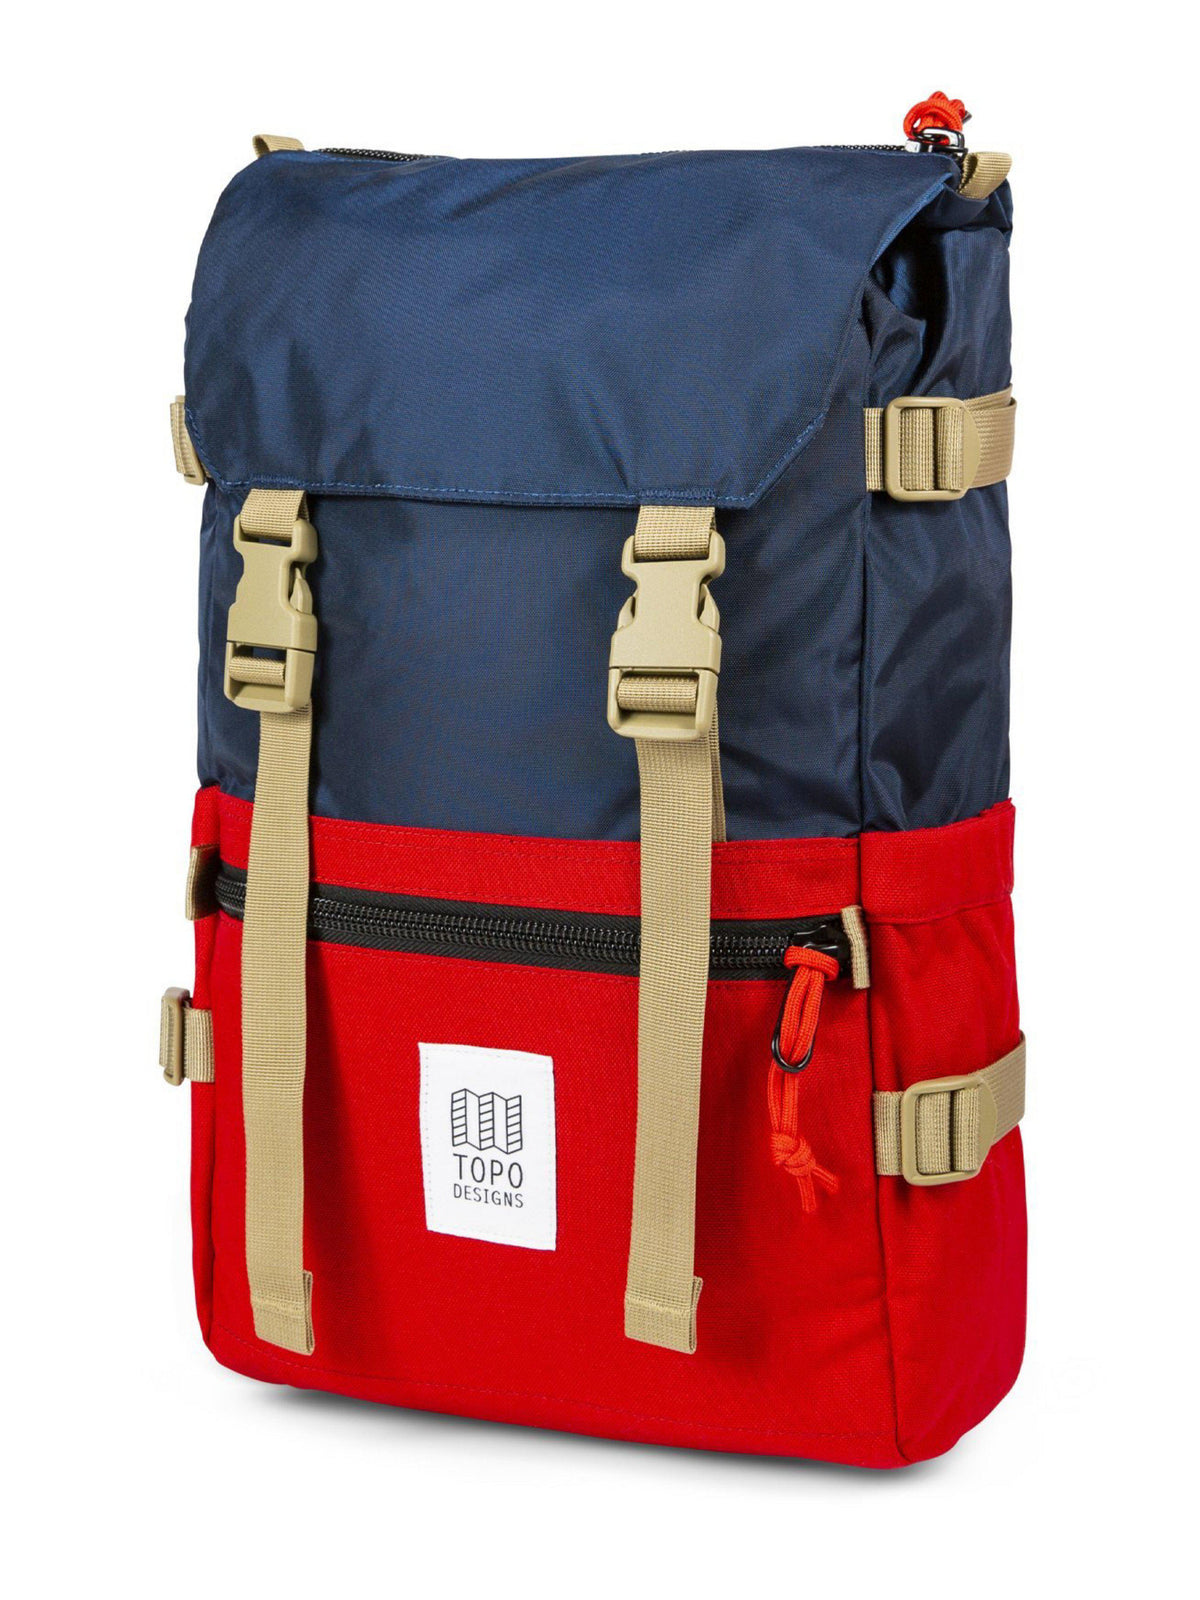 Topo Designs Rover Pack Navy Red